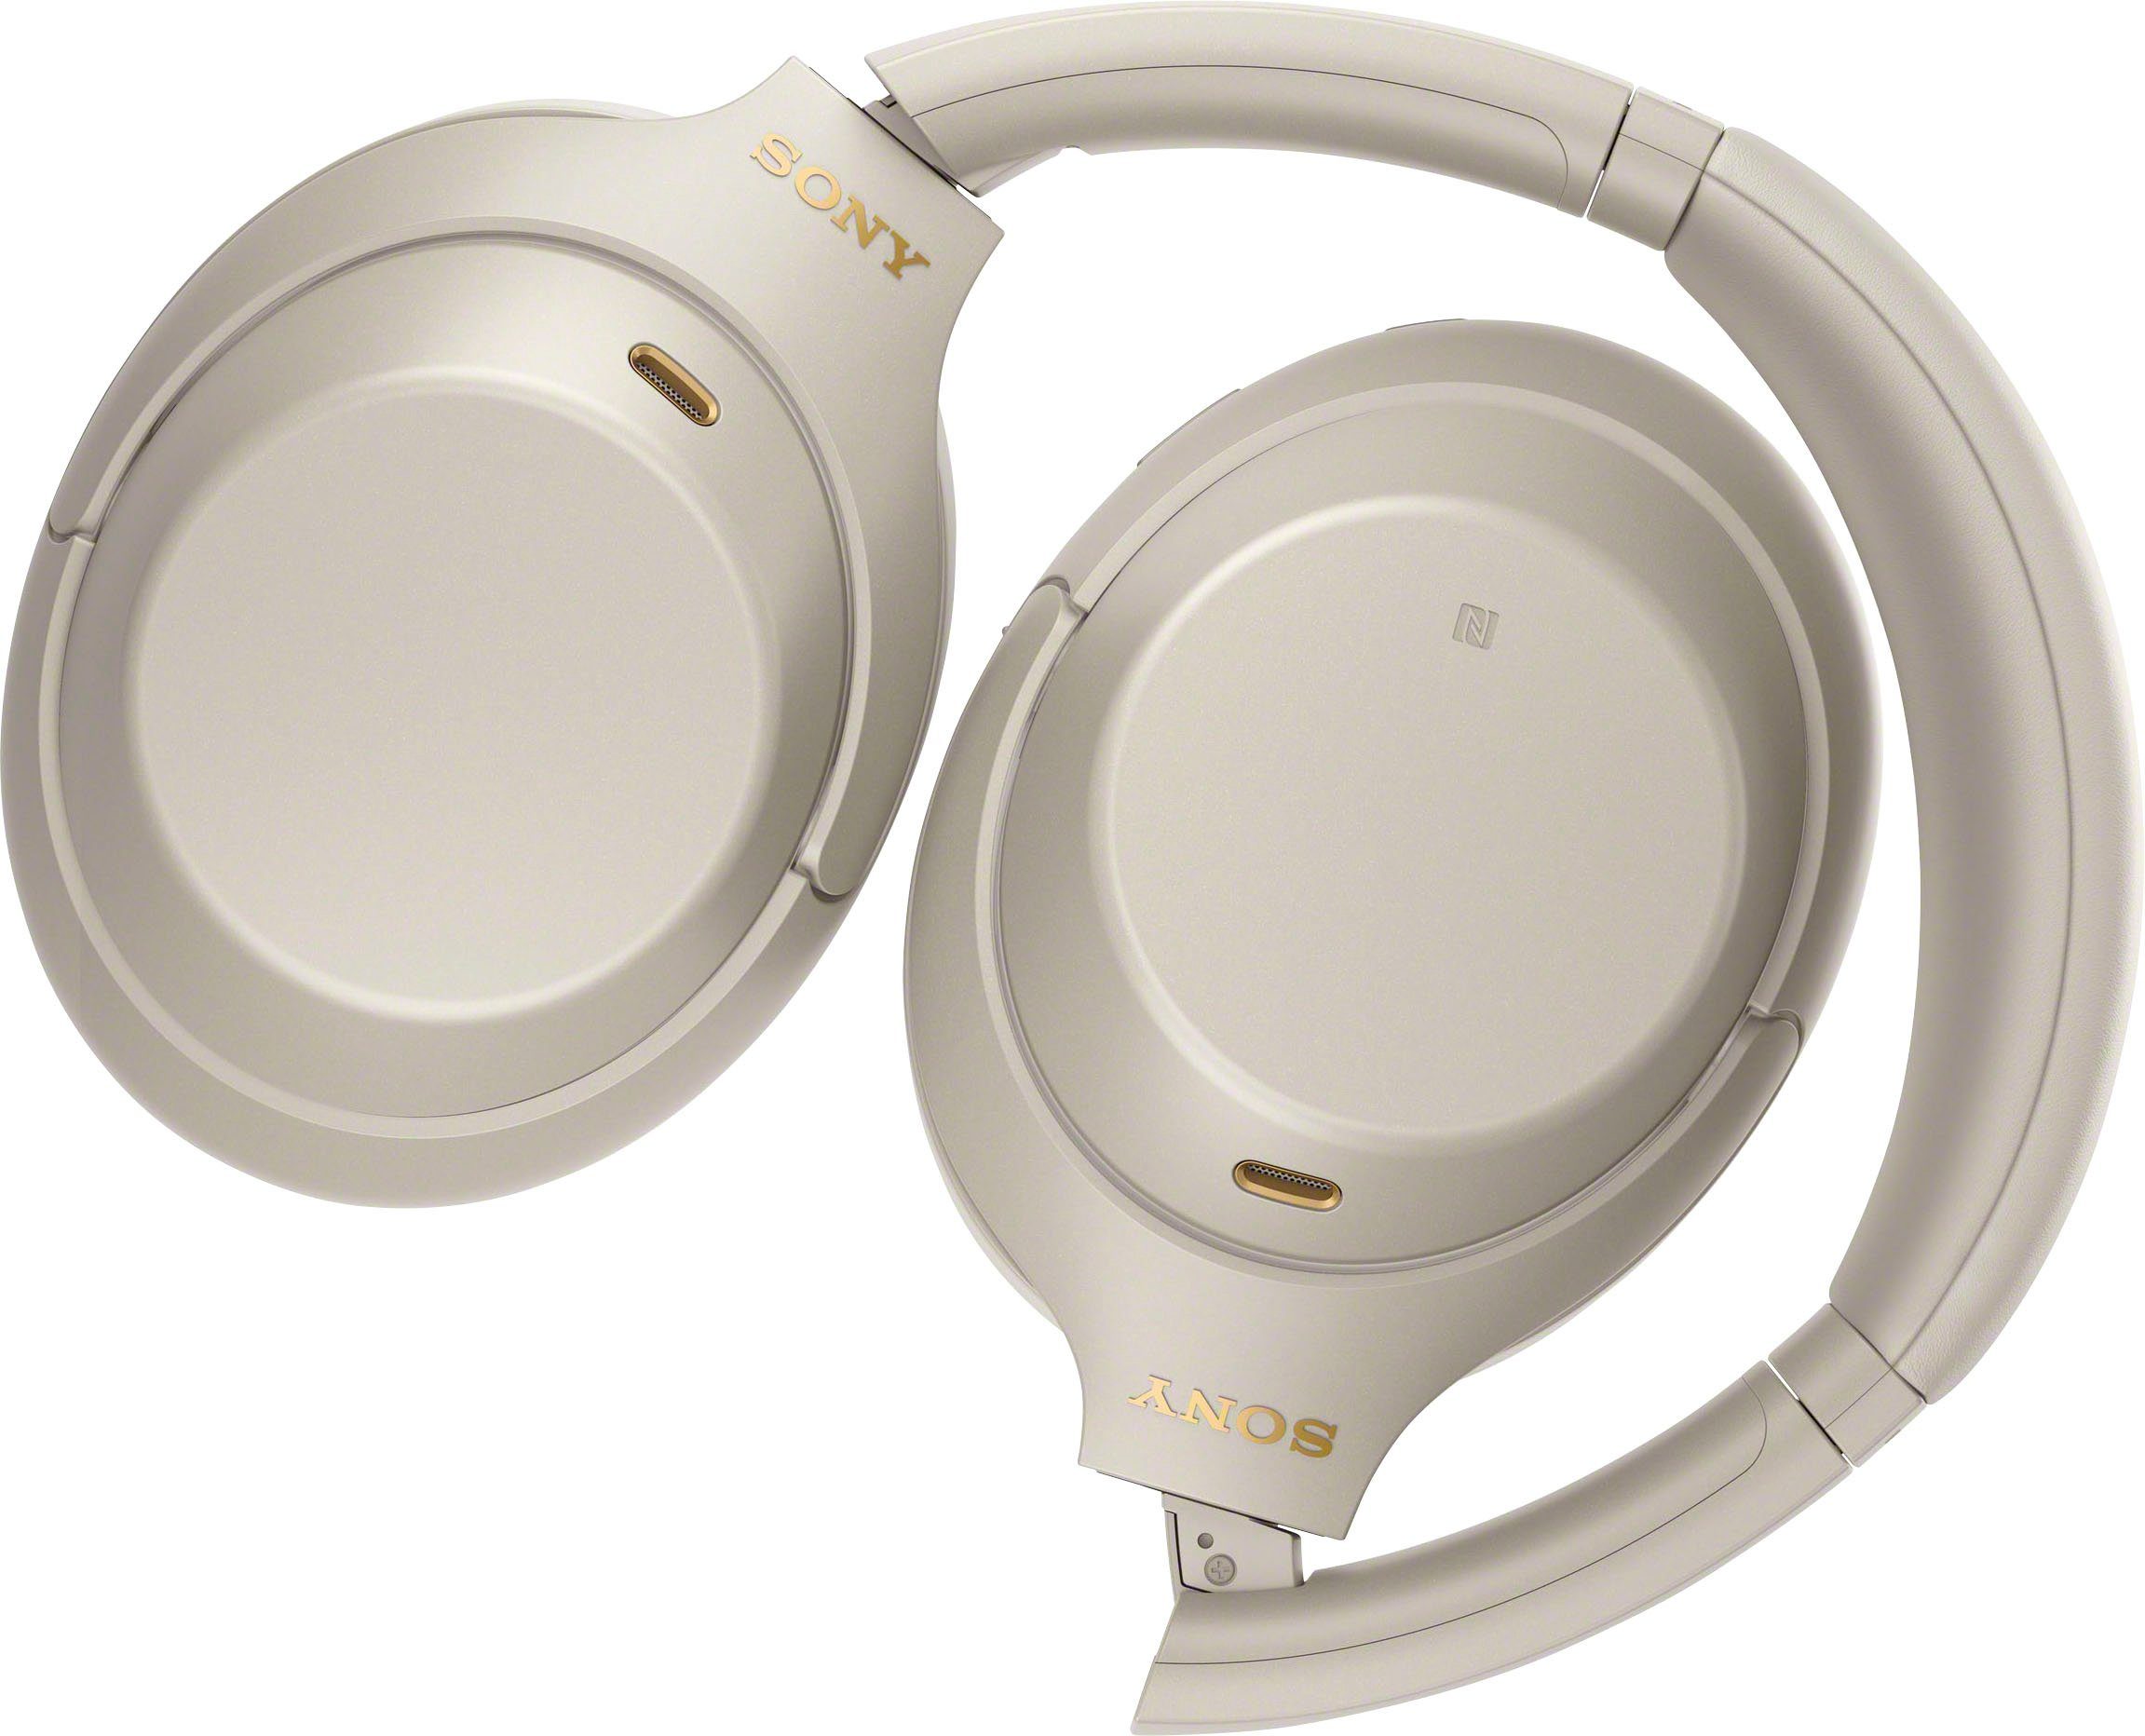 One-Touch Verbindung NFC, Schnellladefunktion) kabelloser (Noise-Cancelling, Sony Bluetooth, Sensor, Silber Over-Ear-Kopfhörer Touch NFC, WH-1000XM4 via